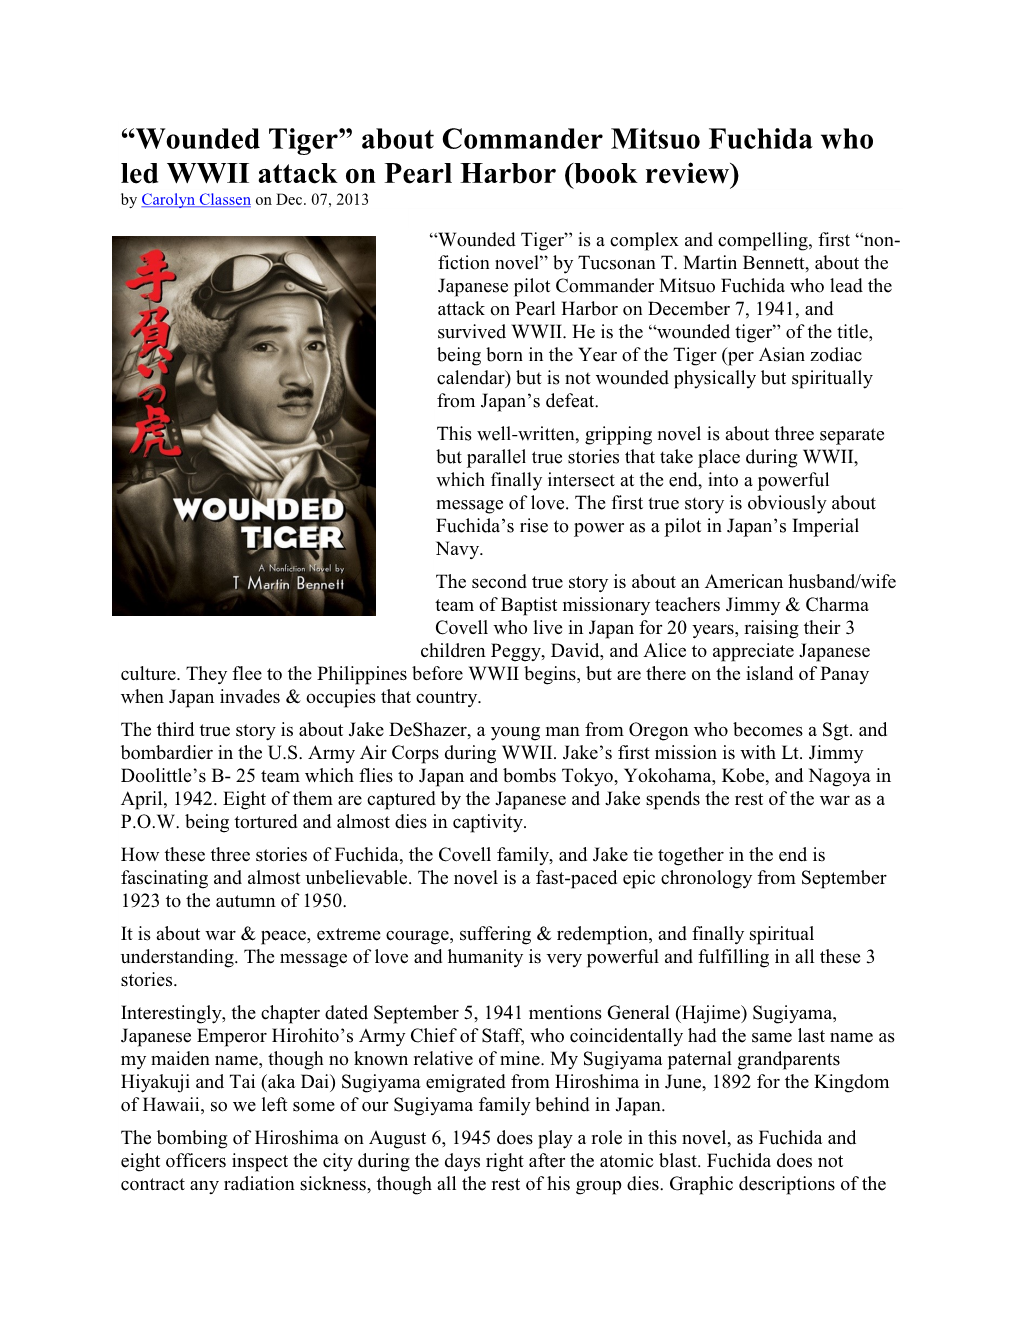 About Commander Mitsuo Fuchida Who Led WWII Attack on Pearl Harbor (Book Review) by Carolyn Classen on Dec